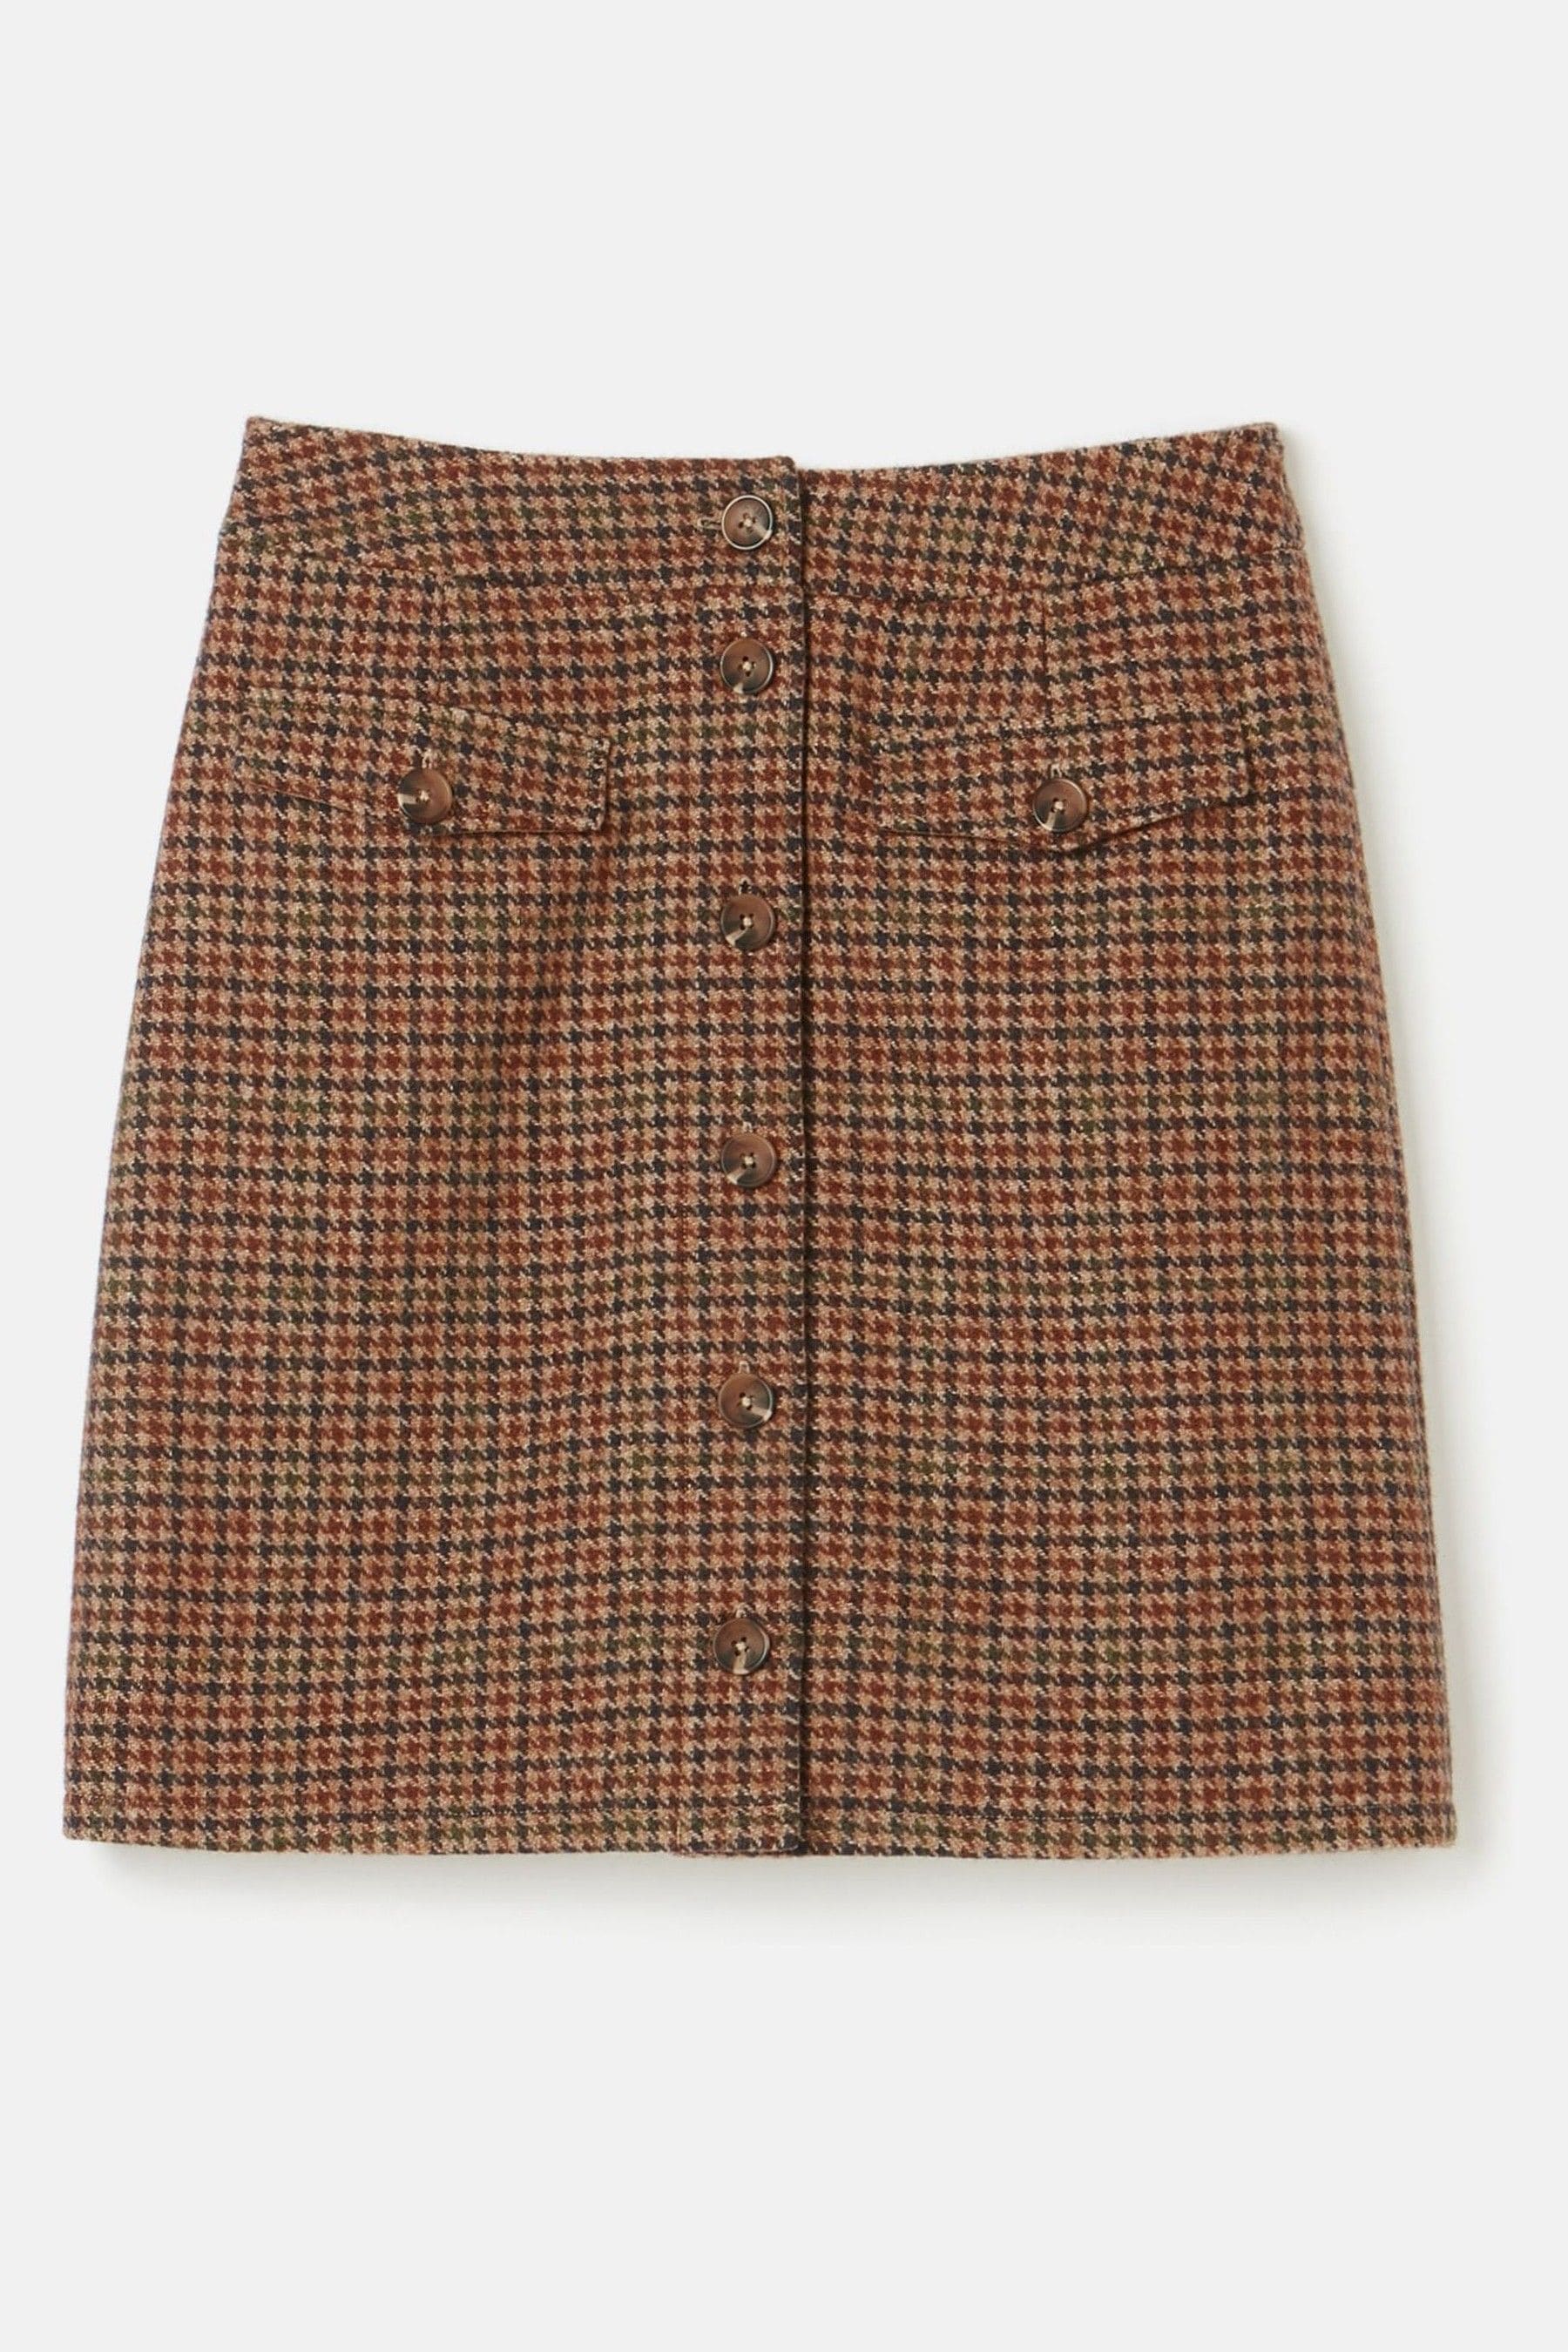 Buy Joules Avery Check Knee Length Tweed Skirt from the Next UK online shop